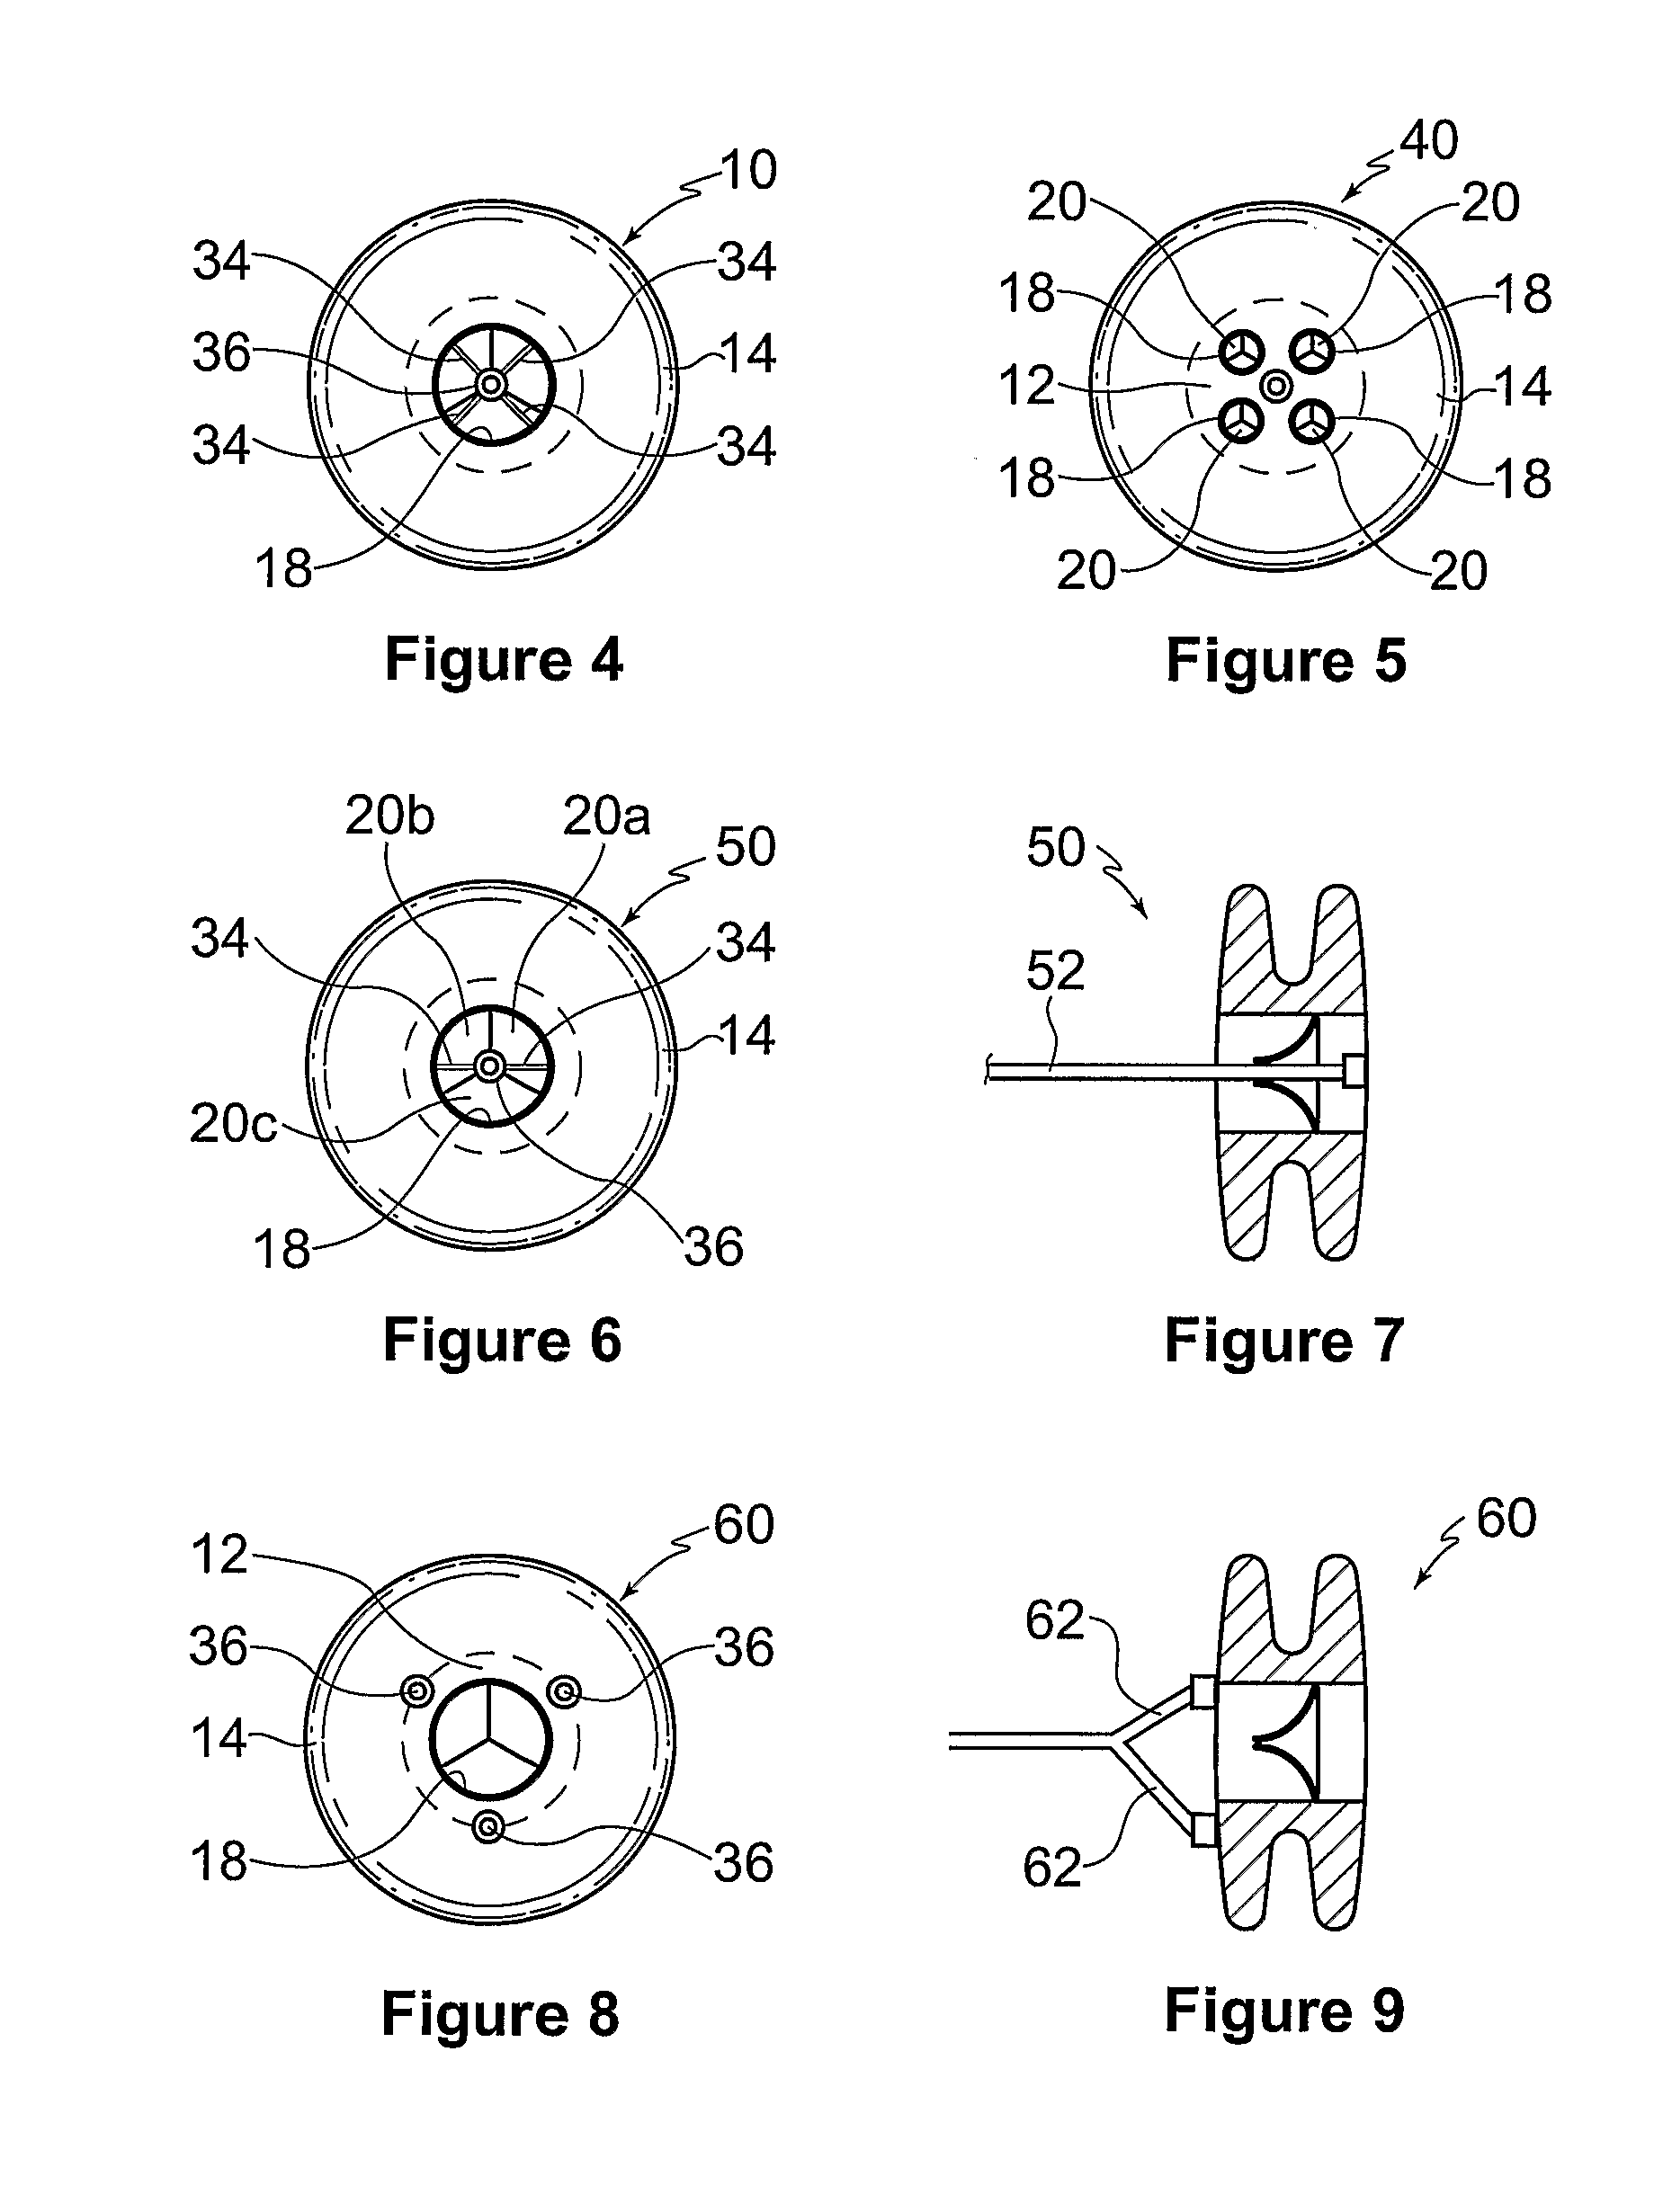 Devices and methods for the treatment of heart failure